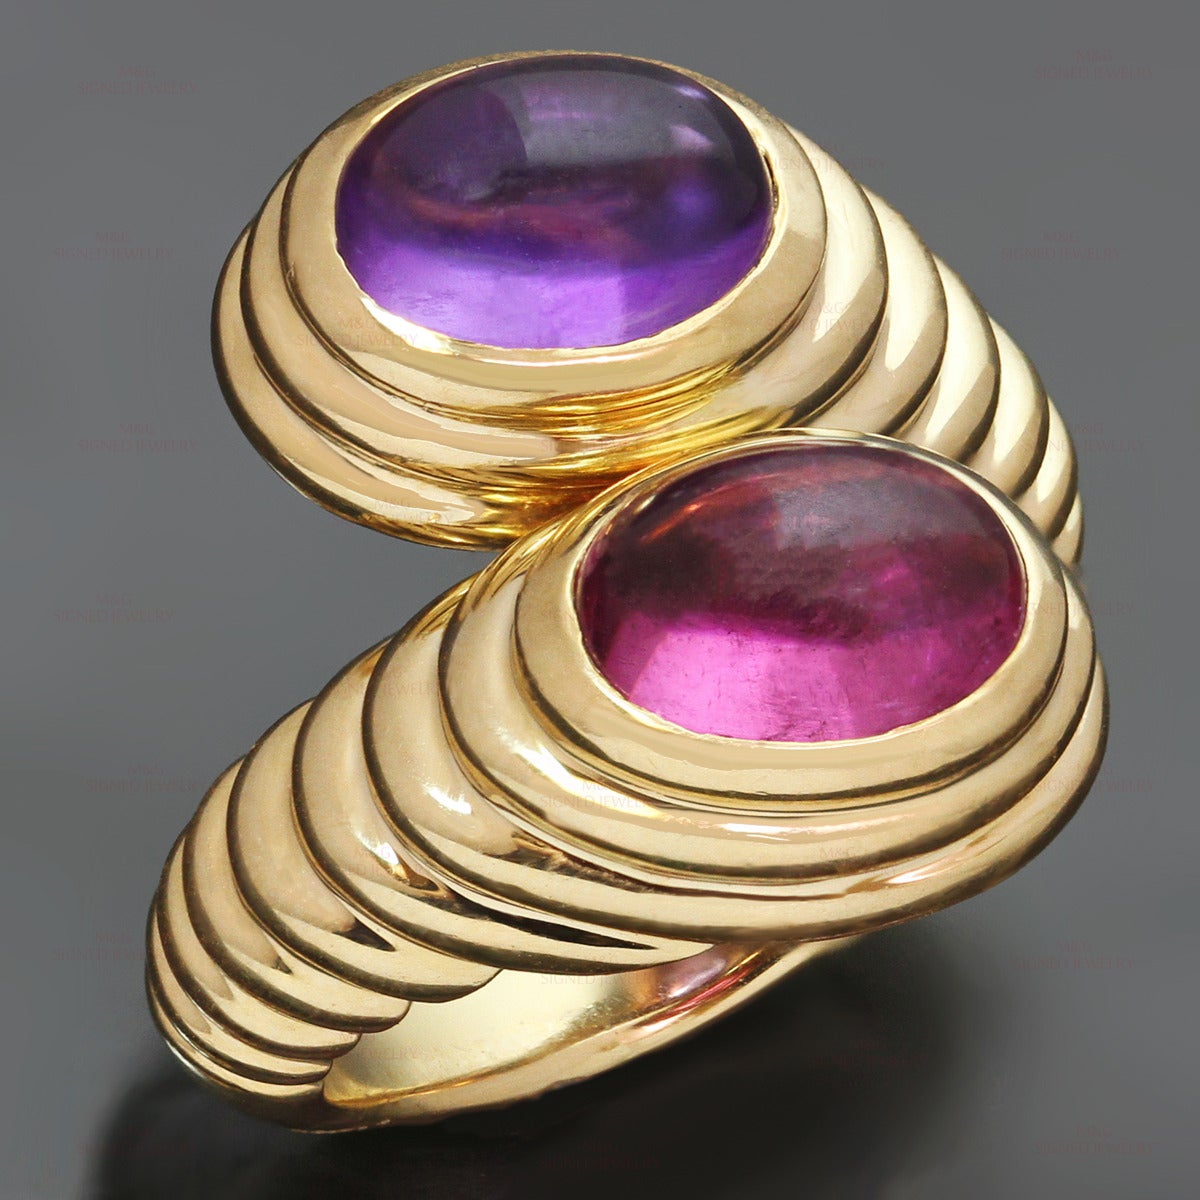 This chic Bvlgari ring is crafted in 18k yellow gold and beautifully set with two oval cabochon gemstones, amethyst and rubellite, weighing an estimated 5.0 carats. Made in Italy circa 2000s. Measurements: 0.78" (20mm) width. The ring size is